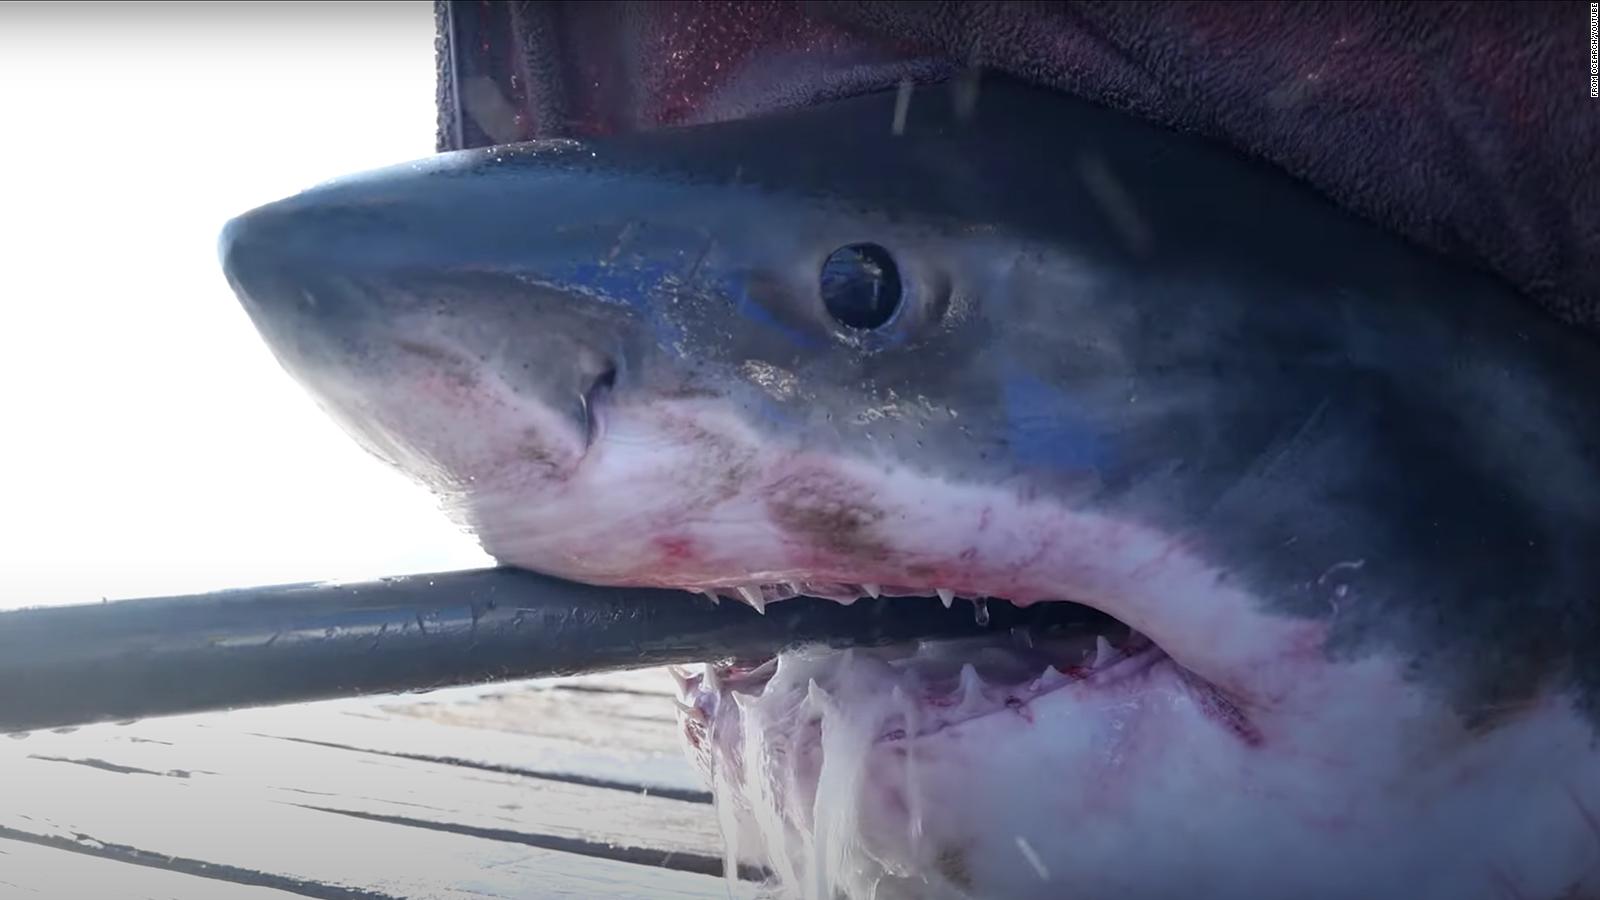 Meet Scot, the 1,600pound great white shark swimming off Florida's